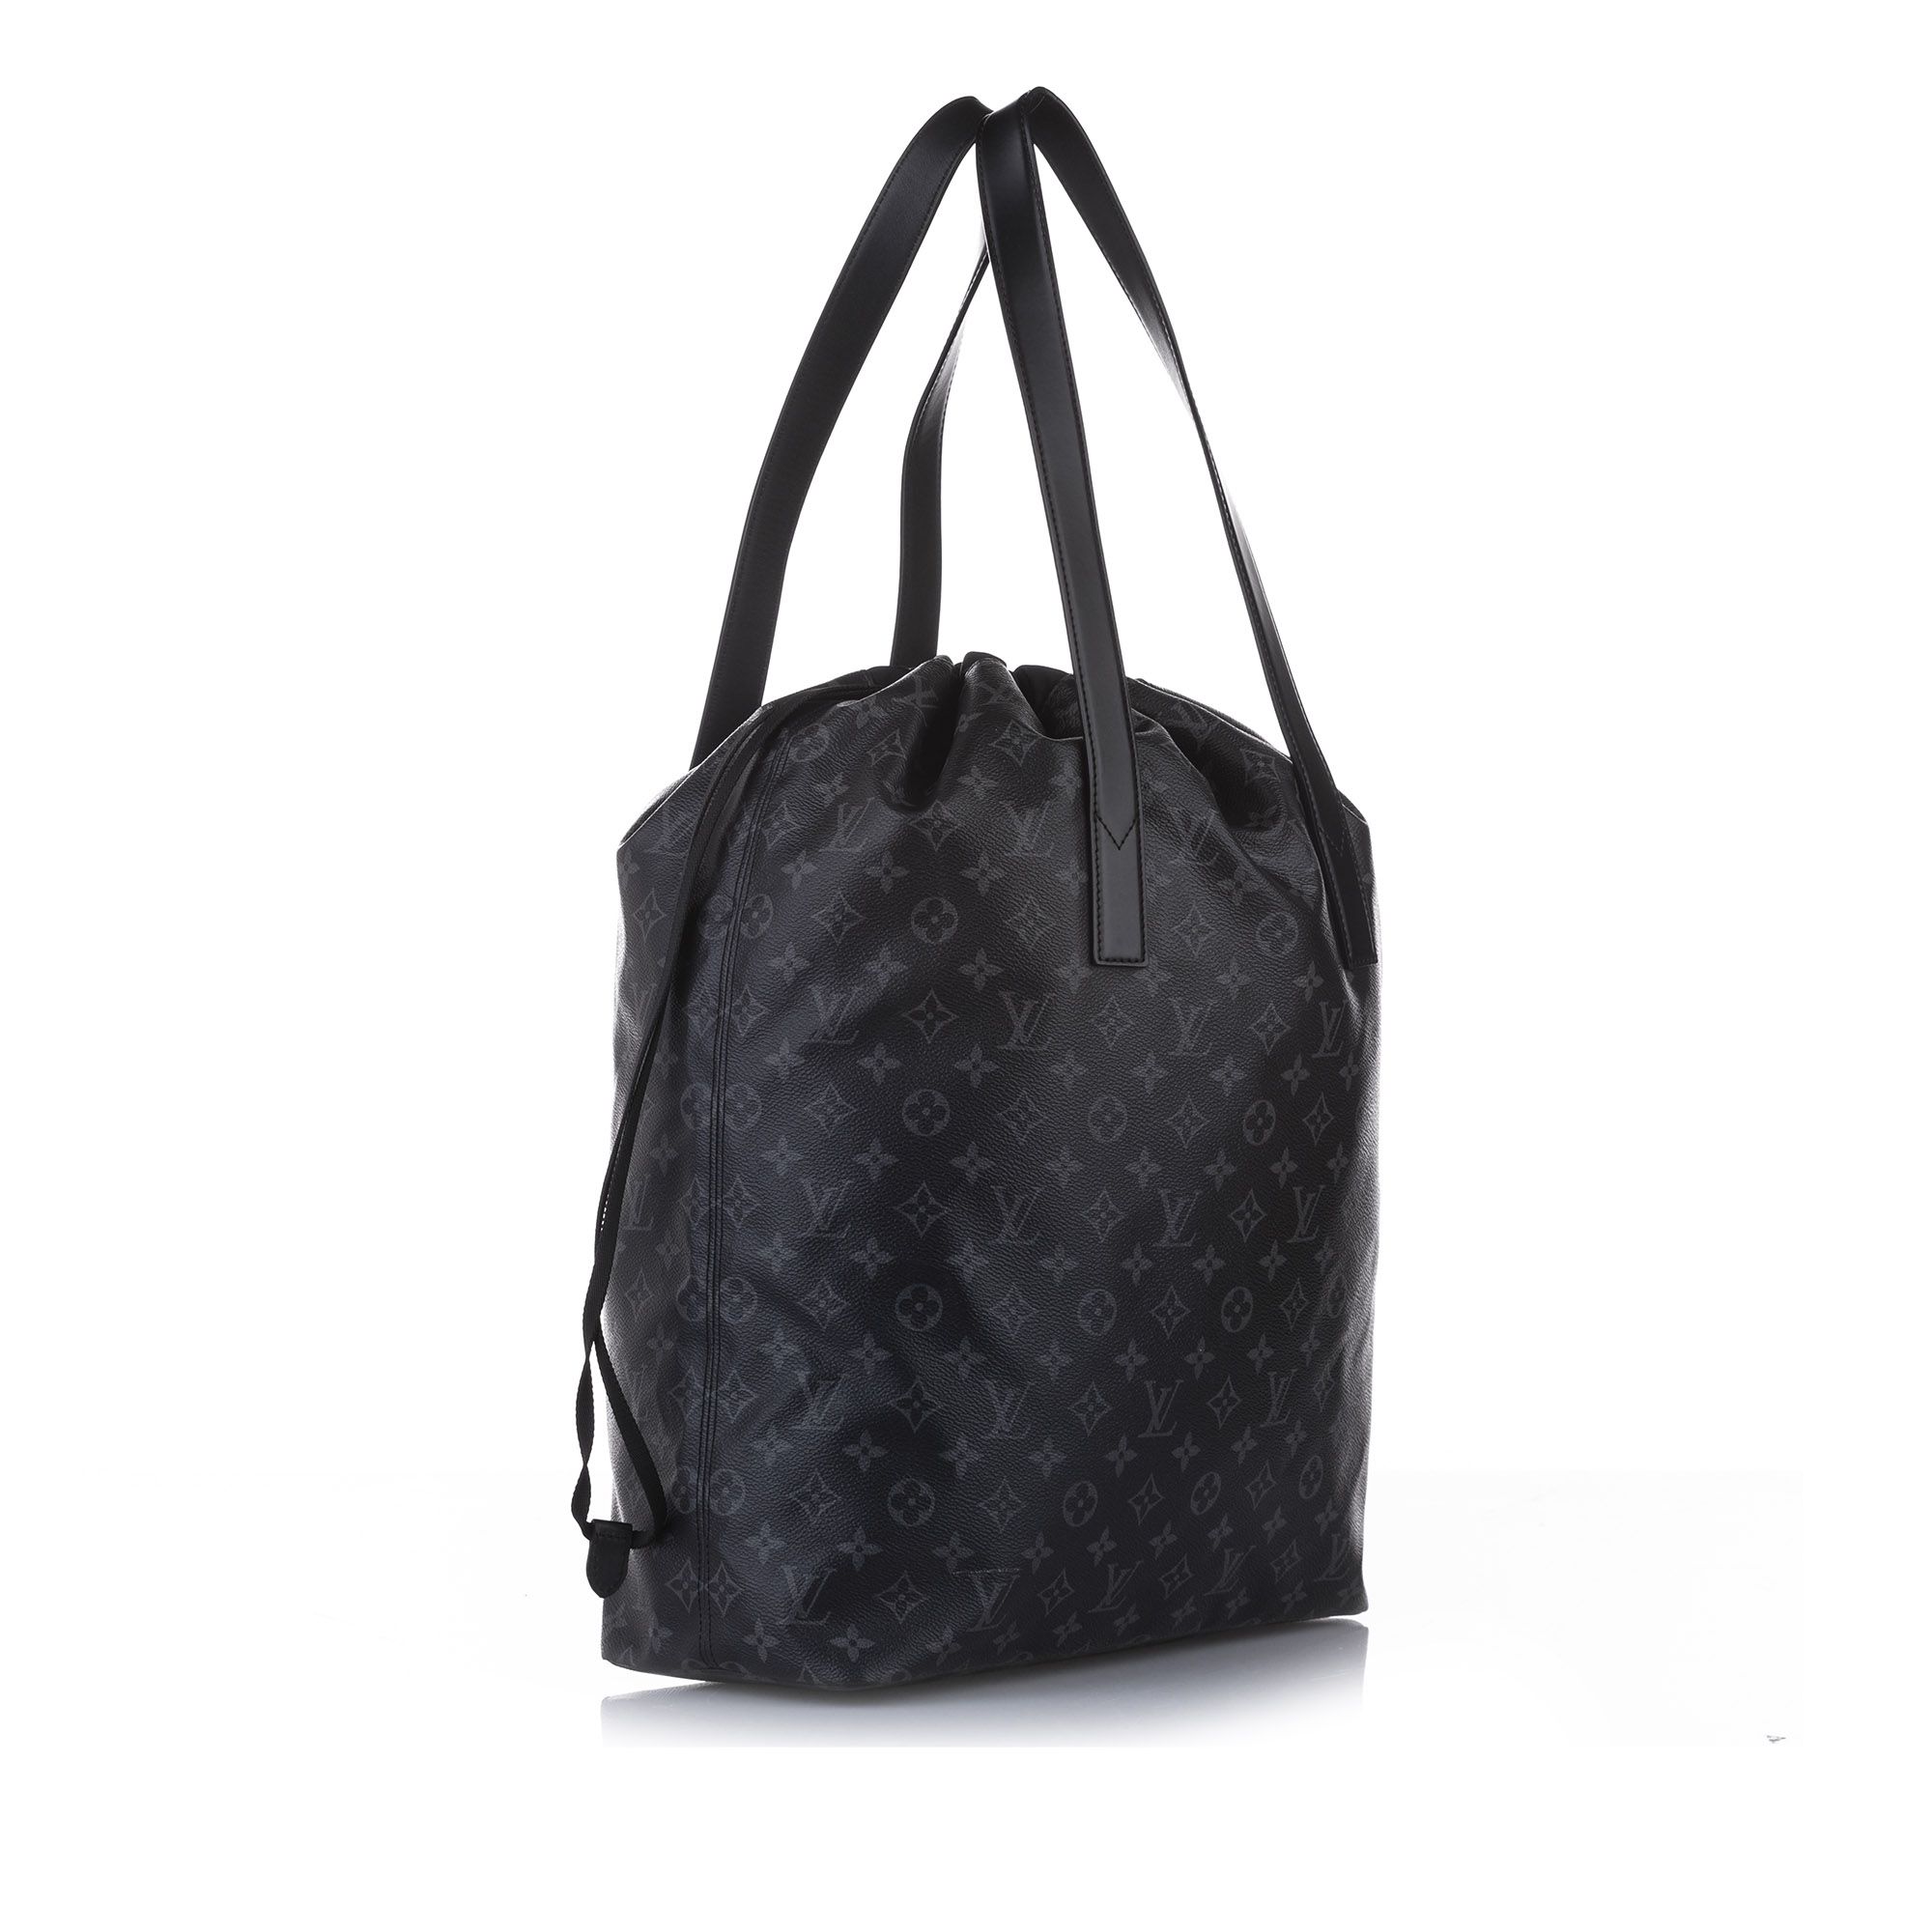 VINTAGE. RRP AS NEW. The Monogram Eclipse Cabas Light features a monogram canvas body, and a top drawstring closure.

Dimensions:
Length 50cm
Width 36cm
Depth 15cm
Hand Drop 20cm
Shoulder Drop 20cm

Original Accessories: Pouch, Dust Bag, Box

Serial Number: GI2158
Color: Black
Material: Canvas x Monogram Canvas
Country of Origin: SPAIN
Boutique Reference: SSU165453K1342


Product Rating: VeryGoodCondition

Certificate of Authenticity is available upon request with no extra fee required. Please contact our customer service team.